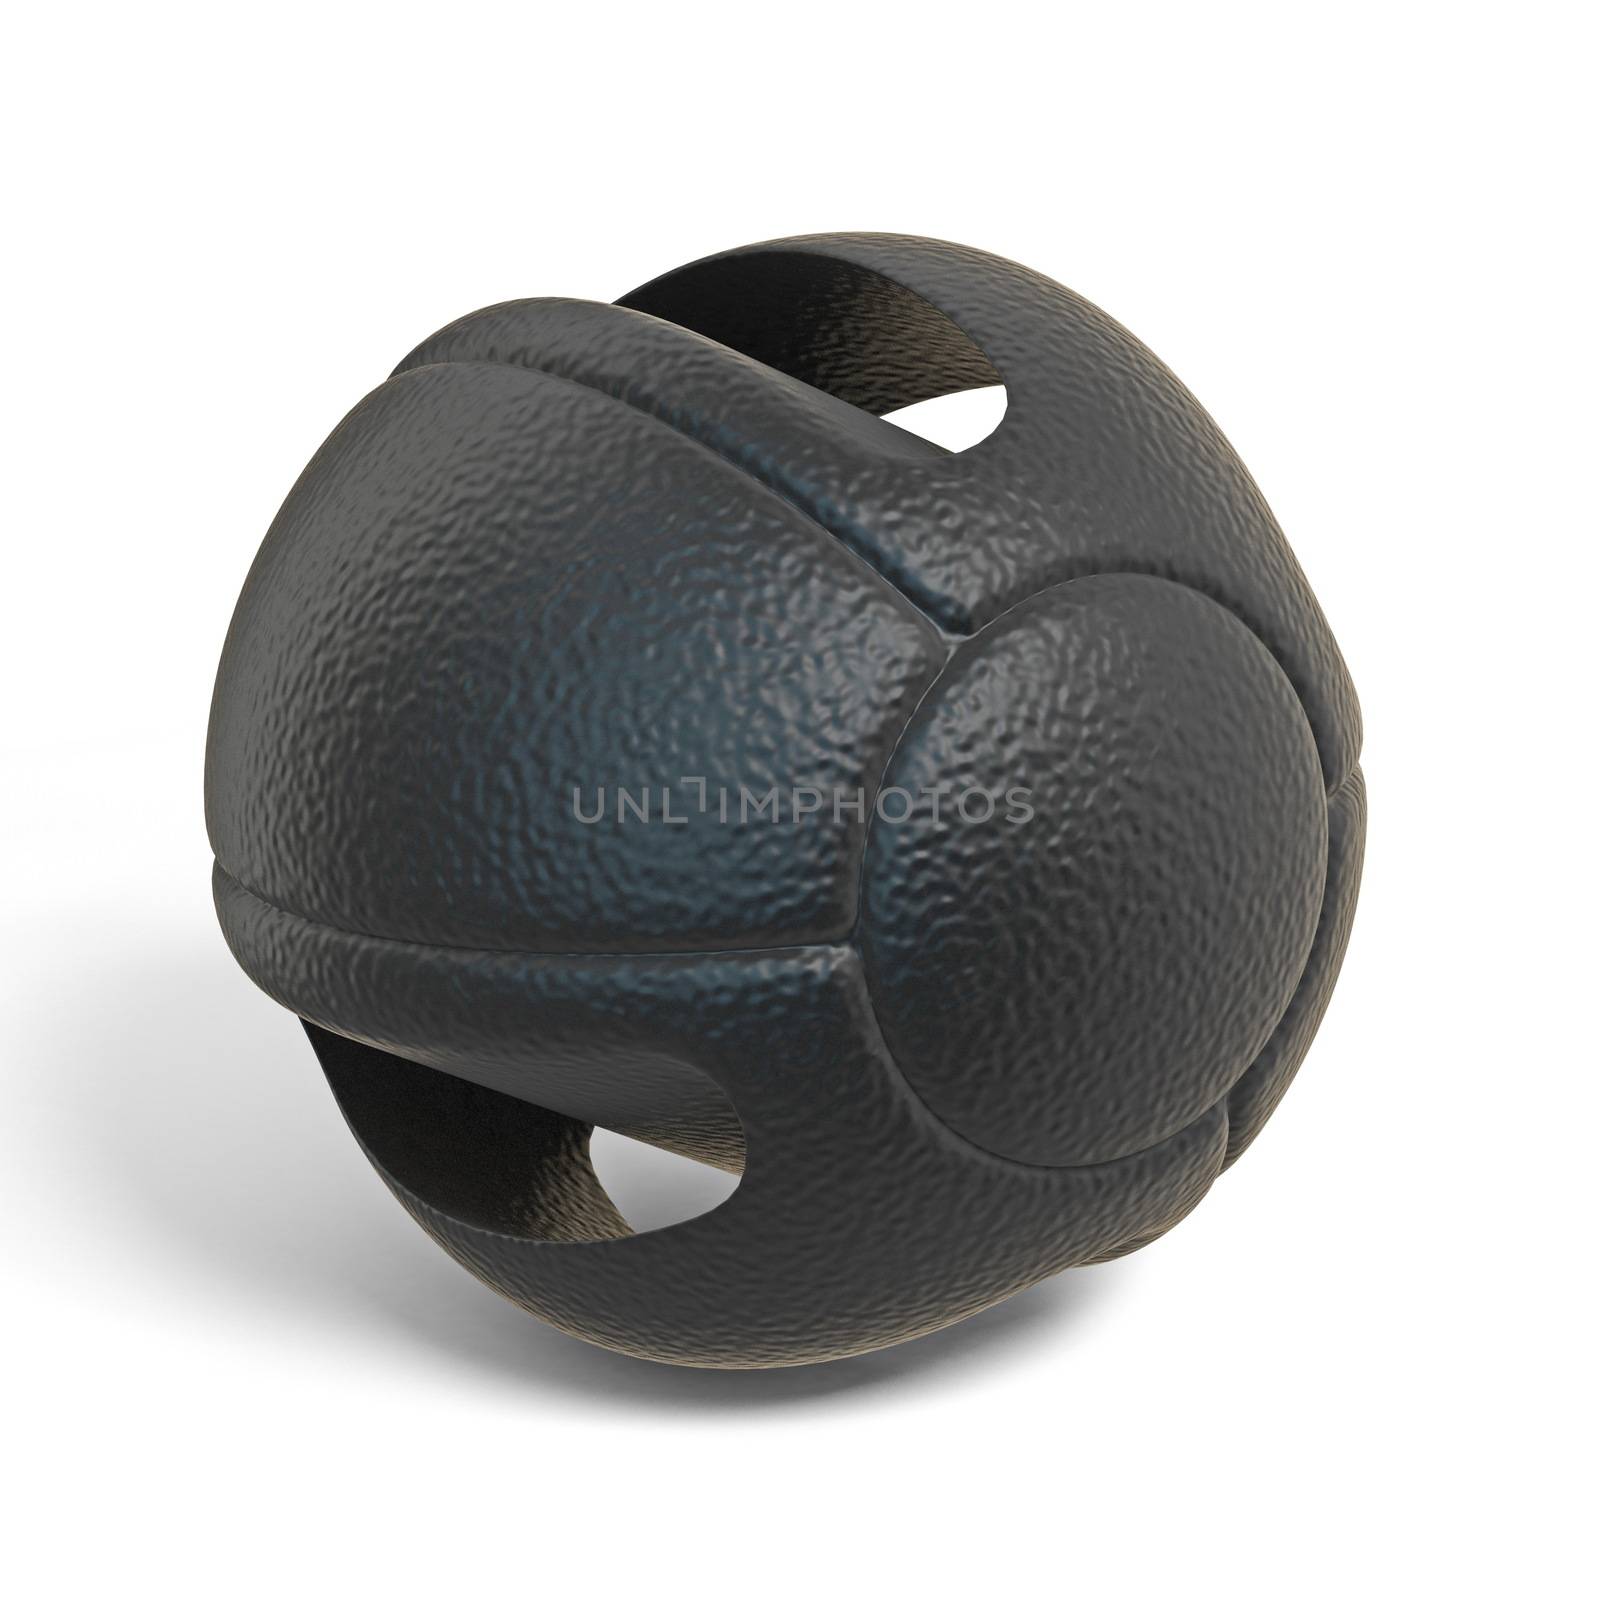 Dual grip medicine ball 3D rendering illustration isolated on white background